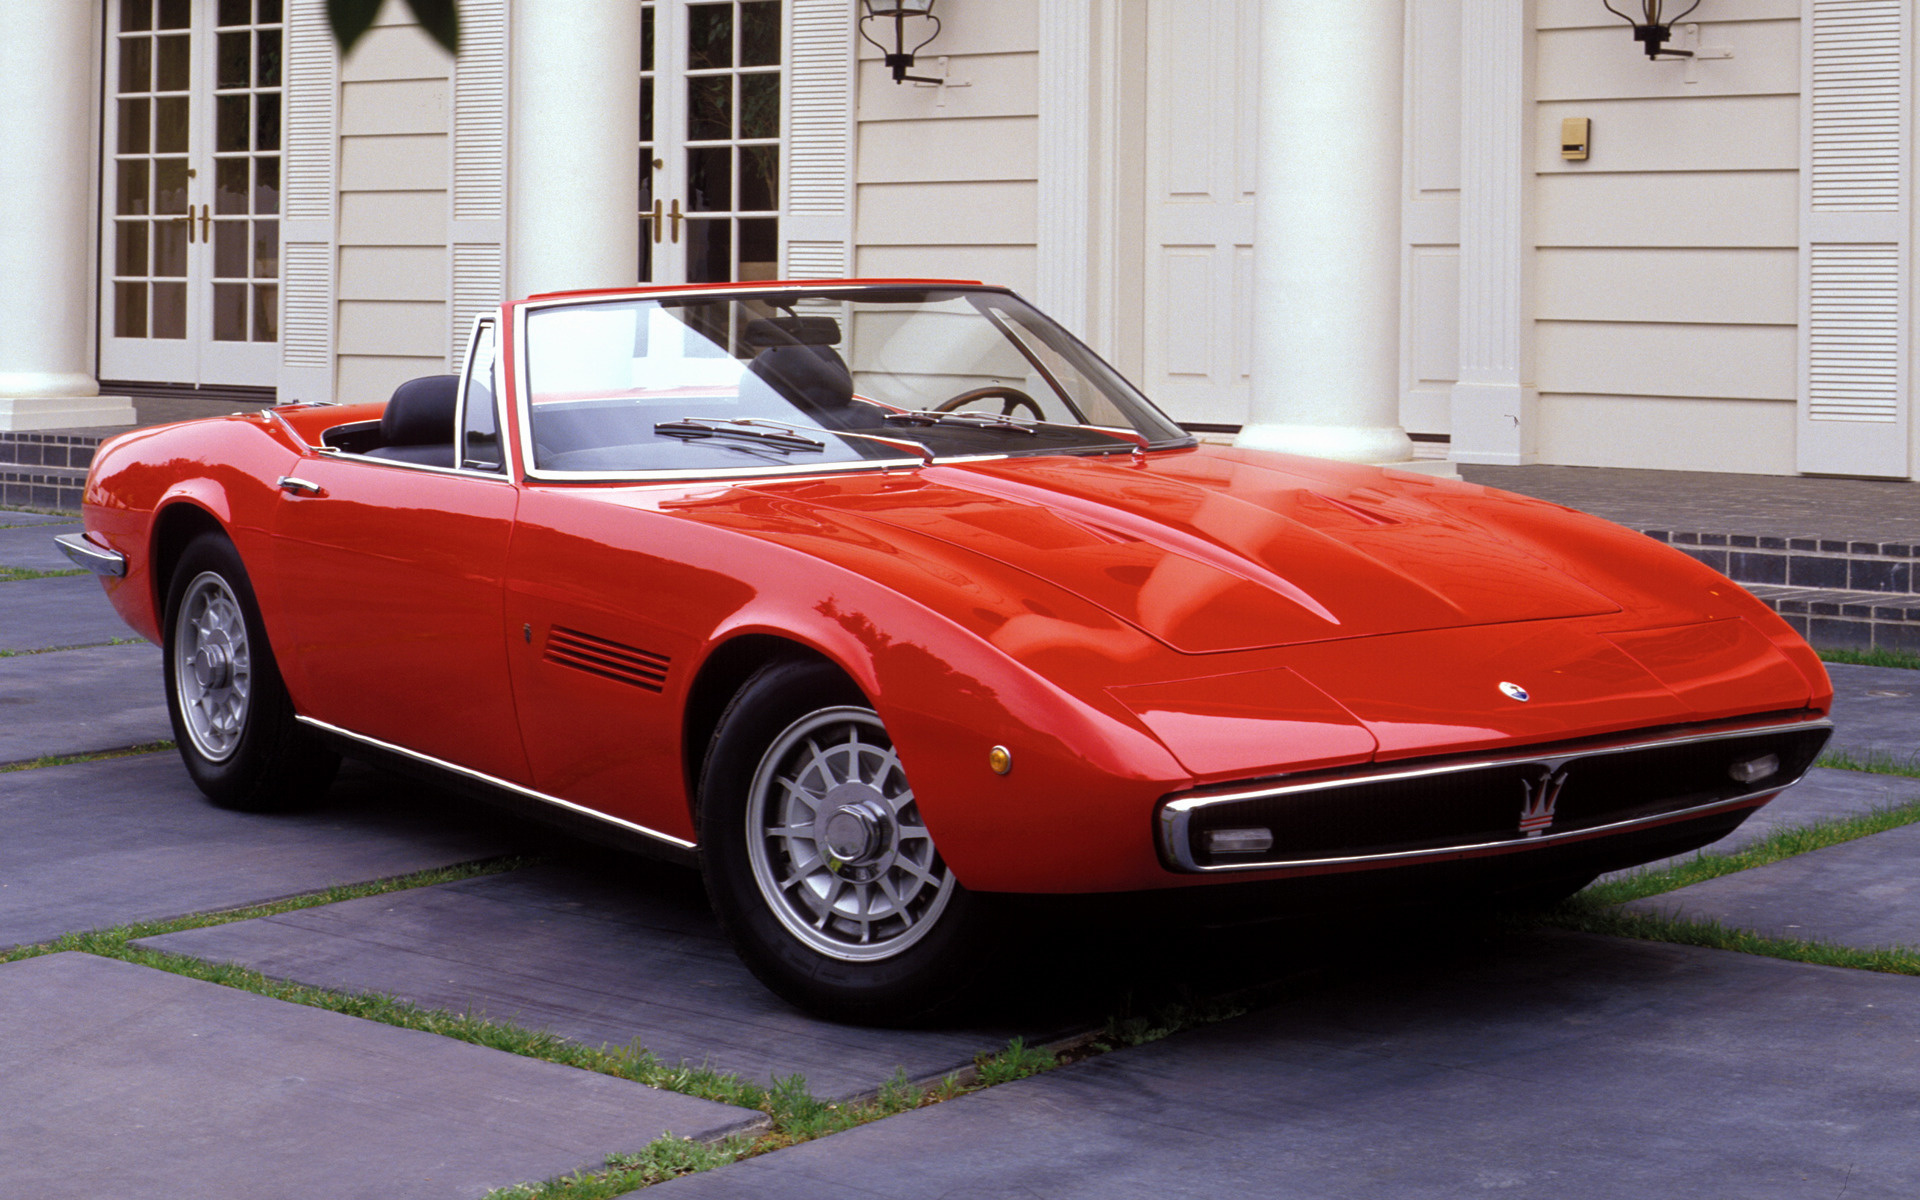 1969 Maserati Ghibli Spyder Wallpapers And Hd Images Car Pixel